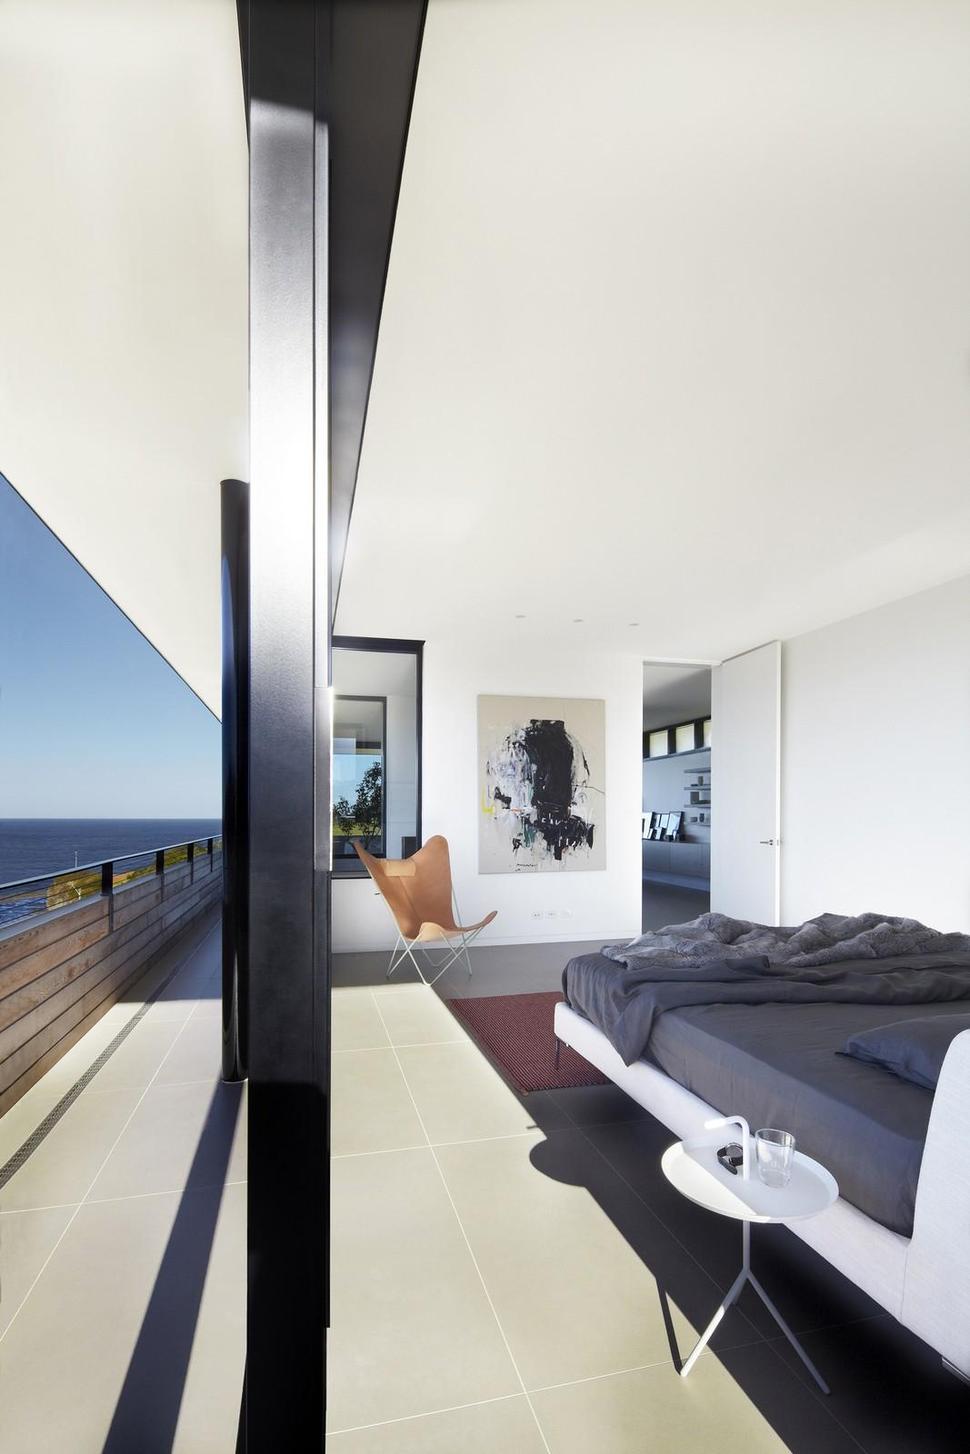 ocean-front-home-270-deg-views-elevated-perch-20-master-bed.jpg